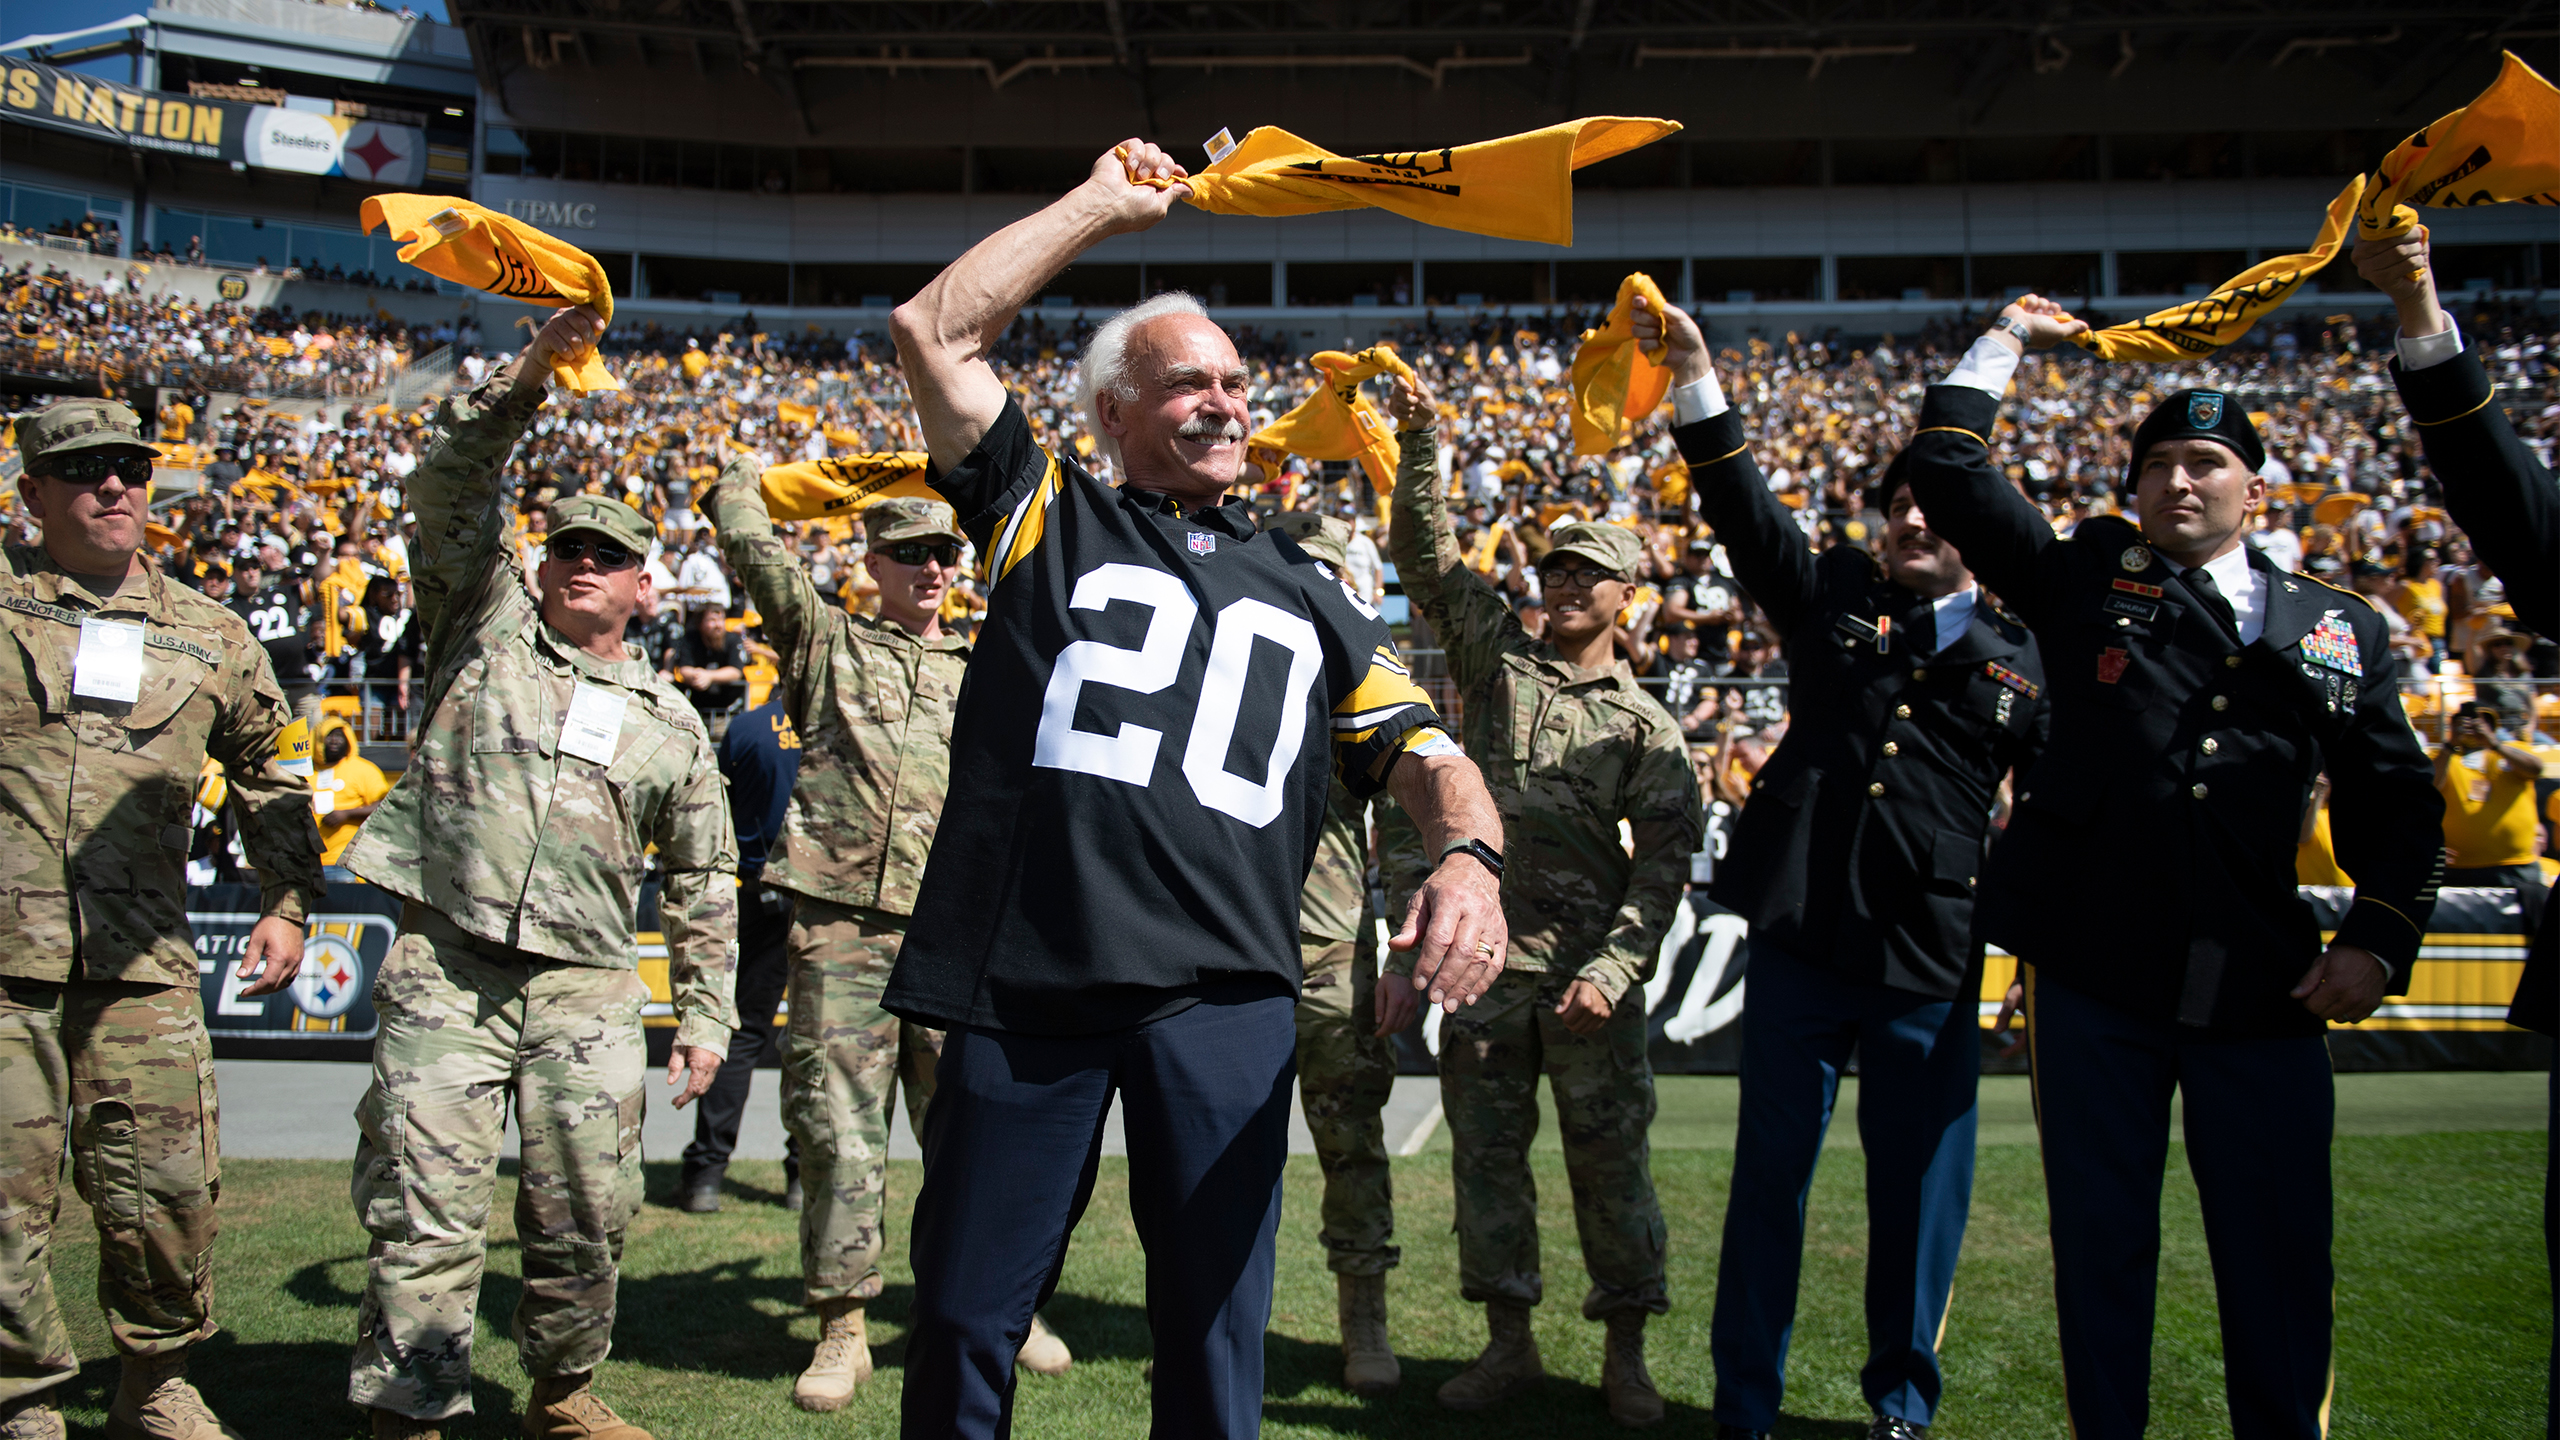 Steelers Legend Rocky Bleier leading the Terrible Towel Twirl with members of the US military